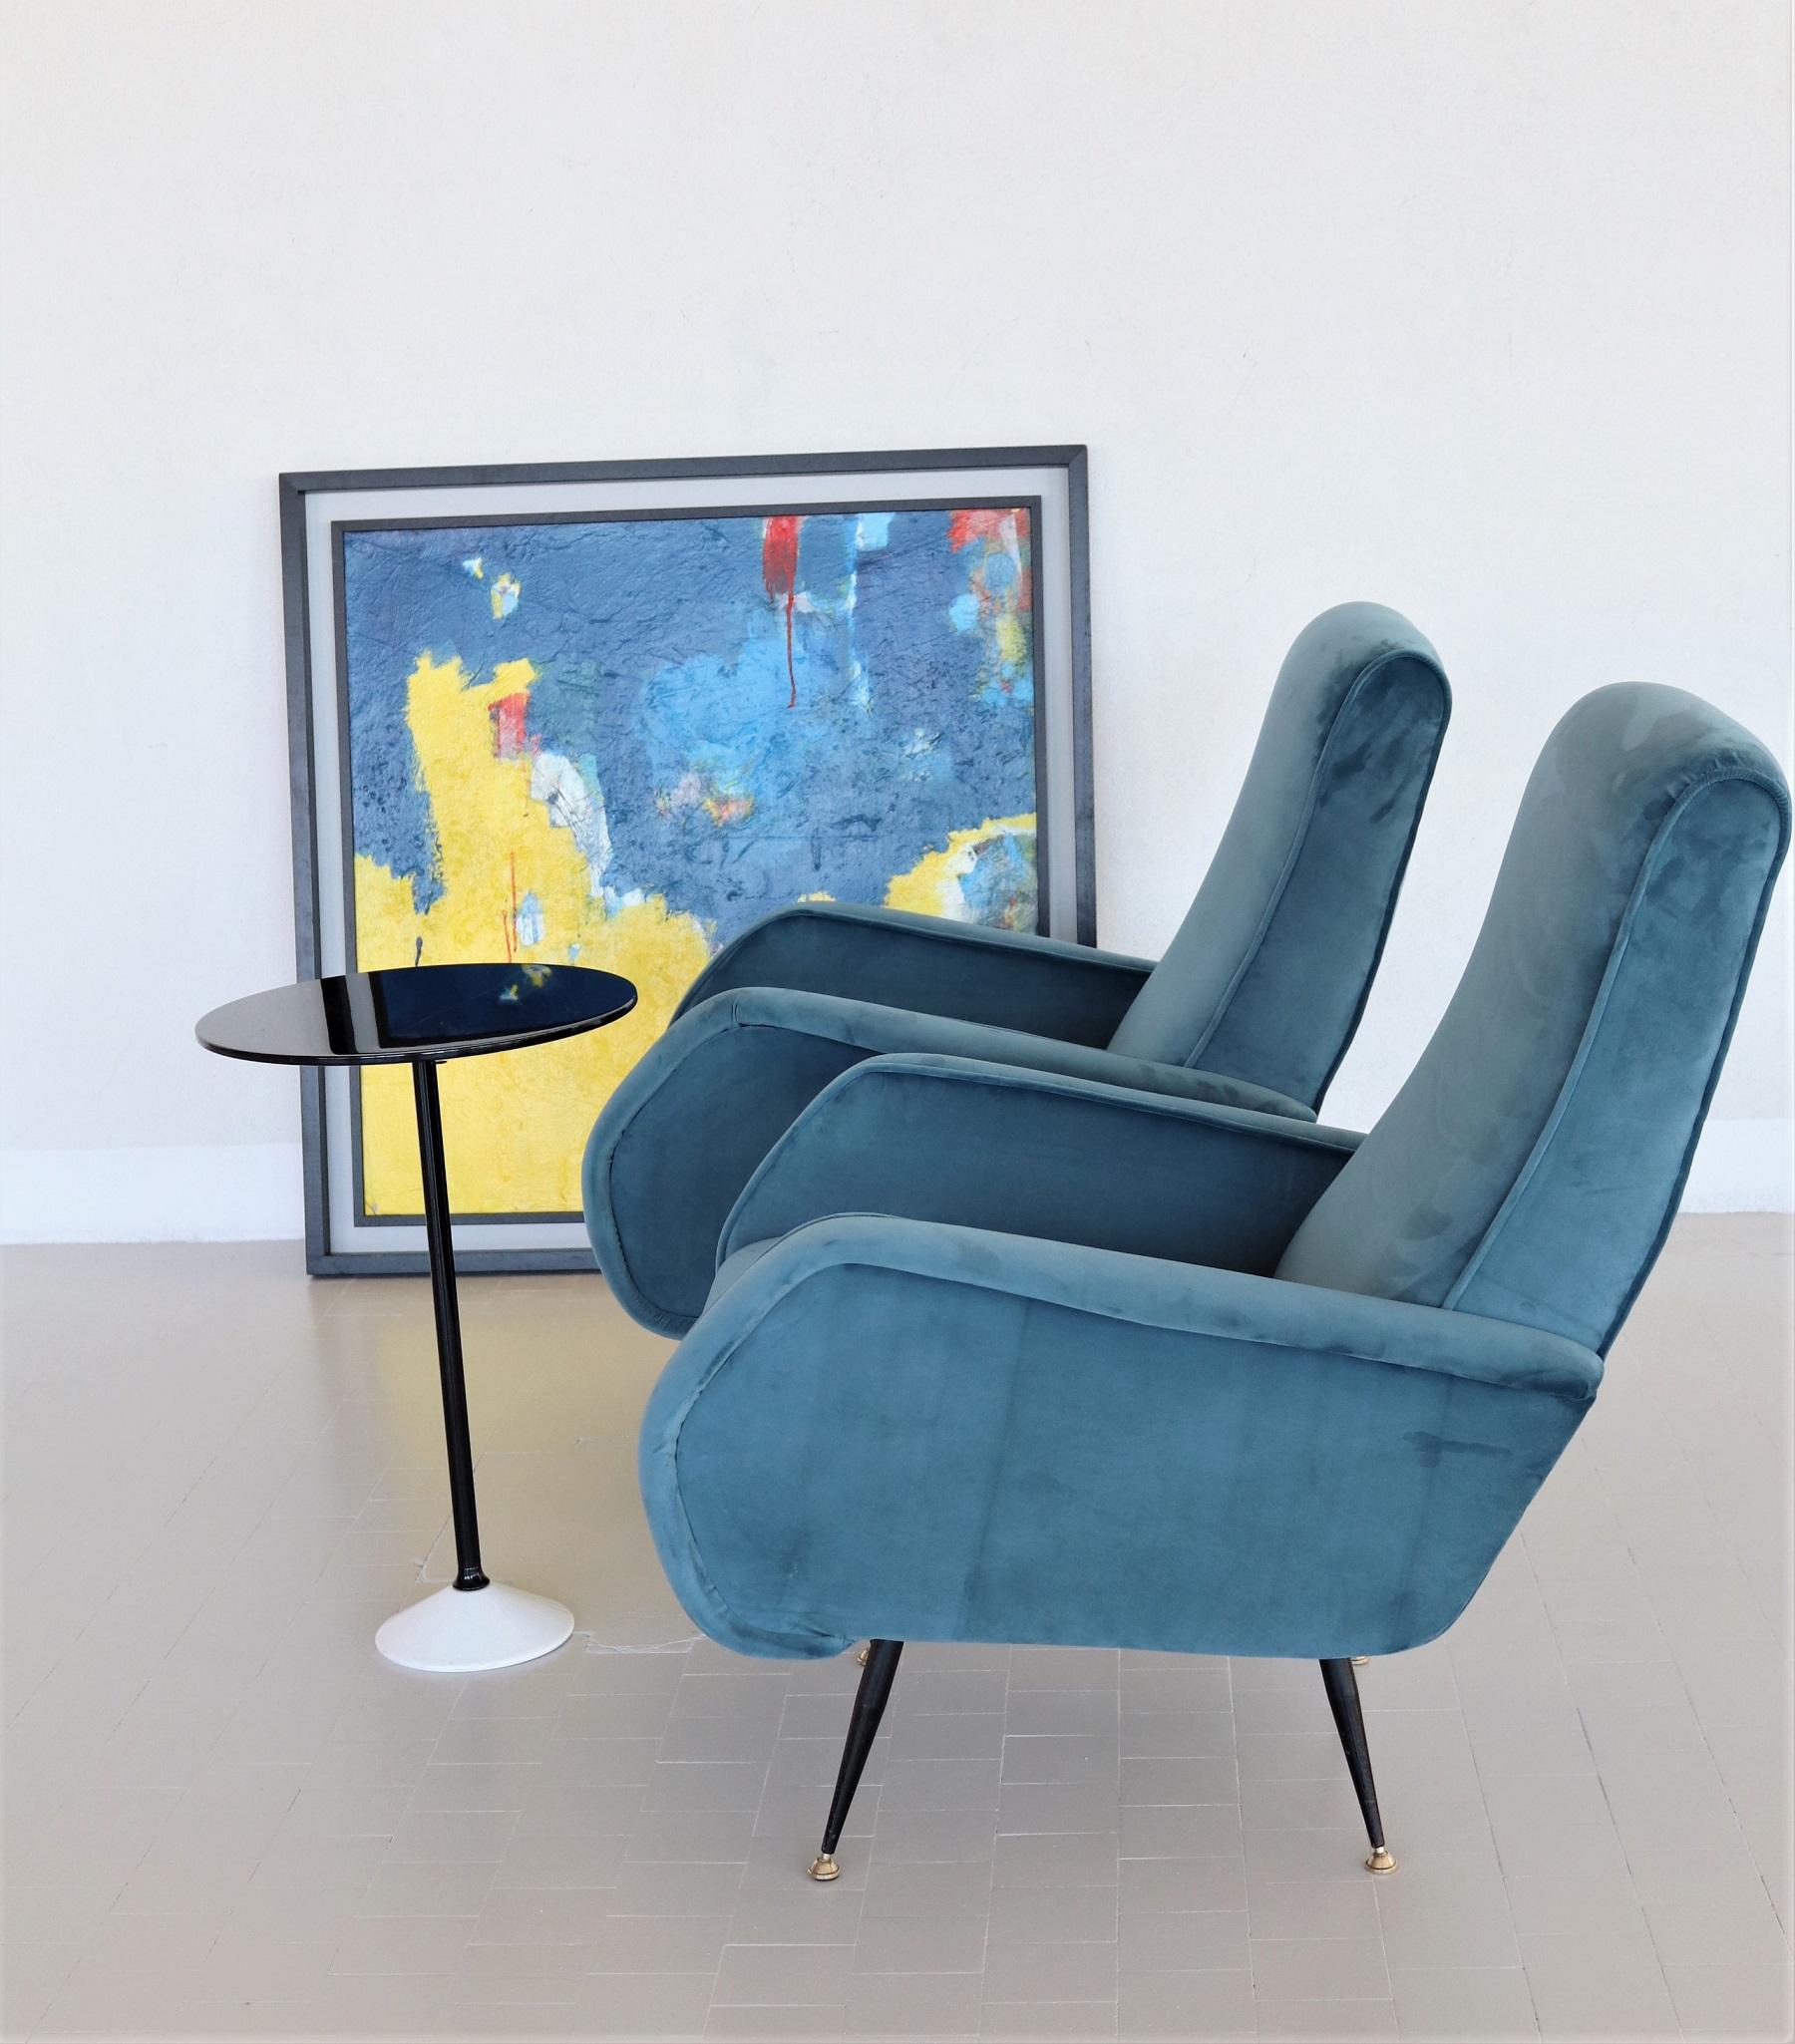 Magnificent and elegant pair of two Italian original midcentury armchairs or lounge chairs from the 1950s with brass stiletto feet.
Completely restored internally with quality material and outside reupholstered with soft Italian blue